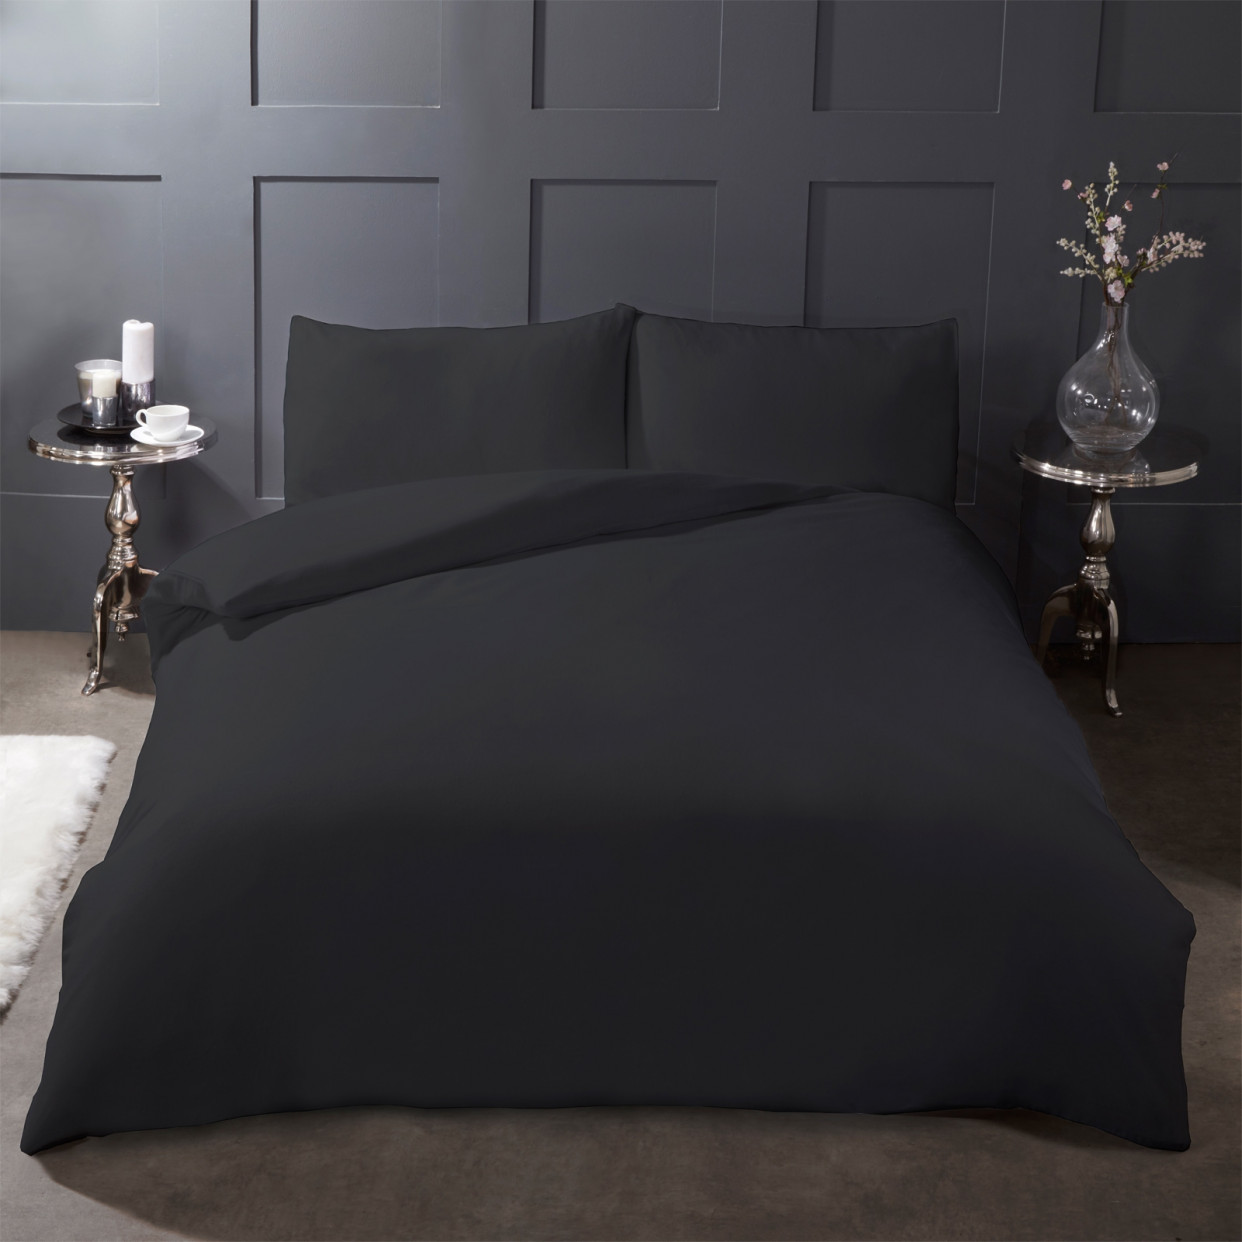 Highams 100% Brushed Cotton Duvet Cover with Pillowcase Flannelette Thermal Bedding Set, Plain Charcoal Black - Single>